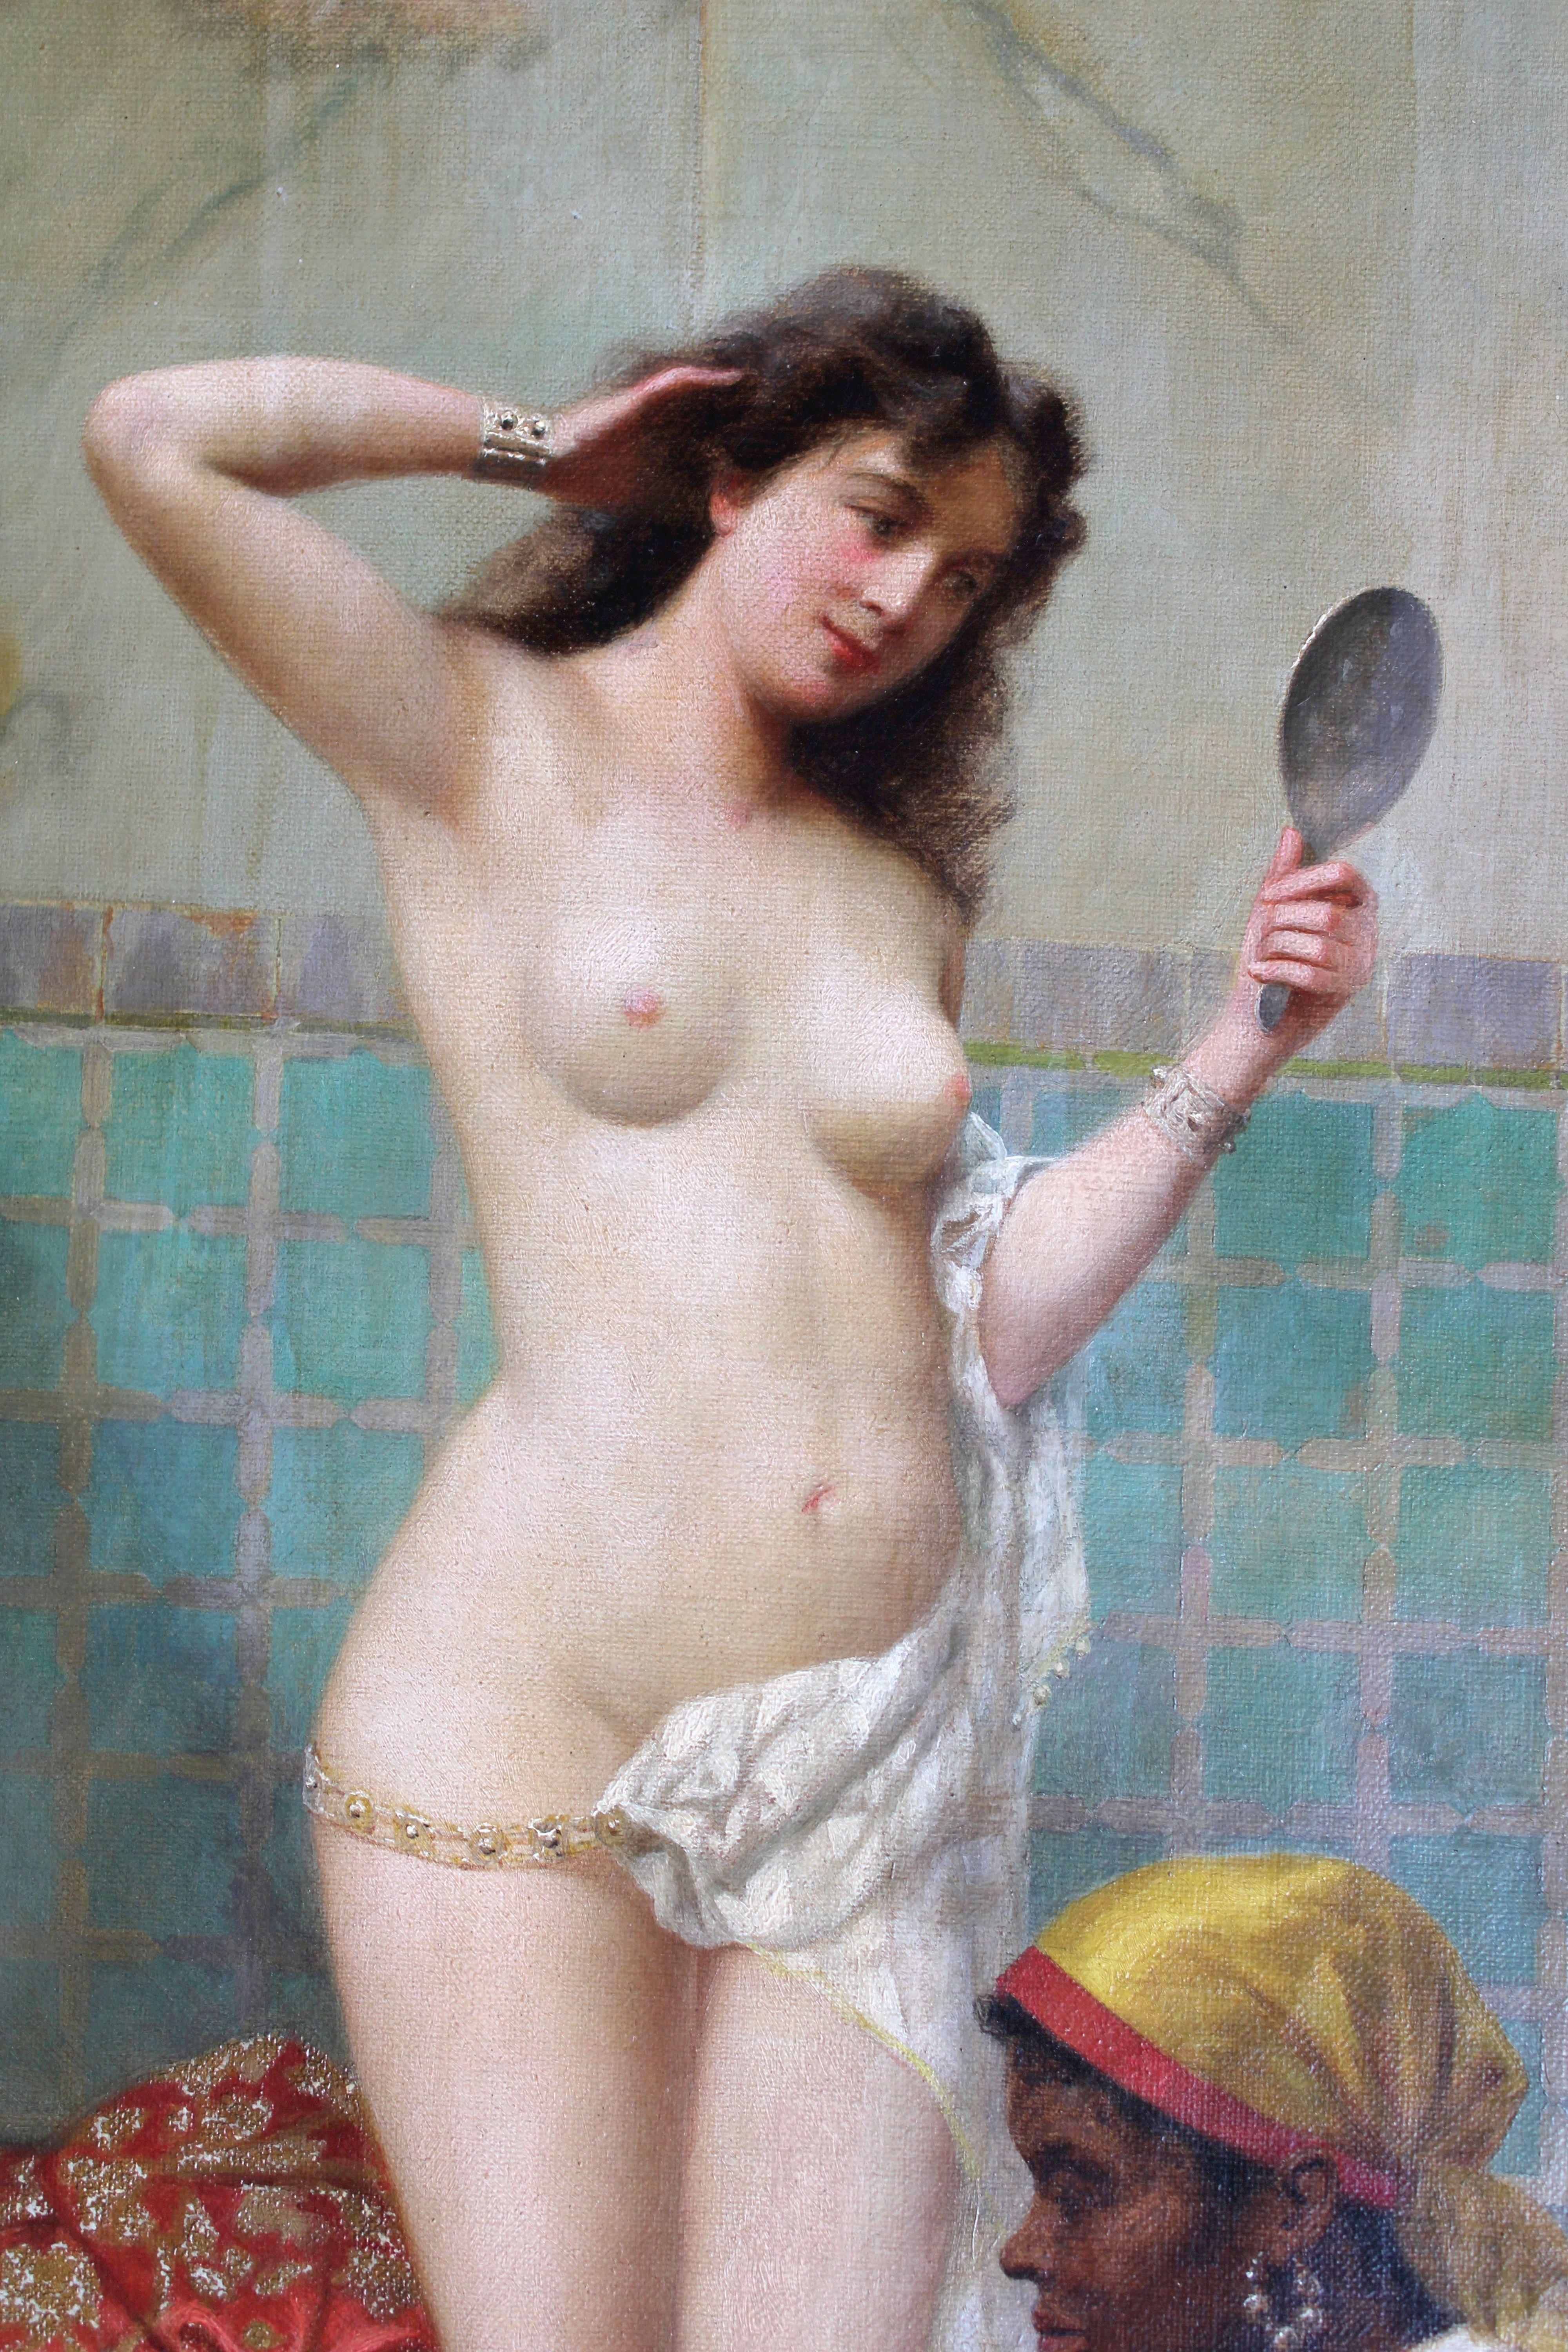 The Bath. Late 19th Century. Oil on canvas, 61x46 сm - Realist Painting by Vinsent G. Stiepevich